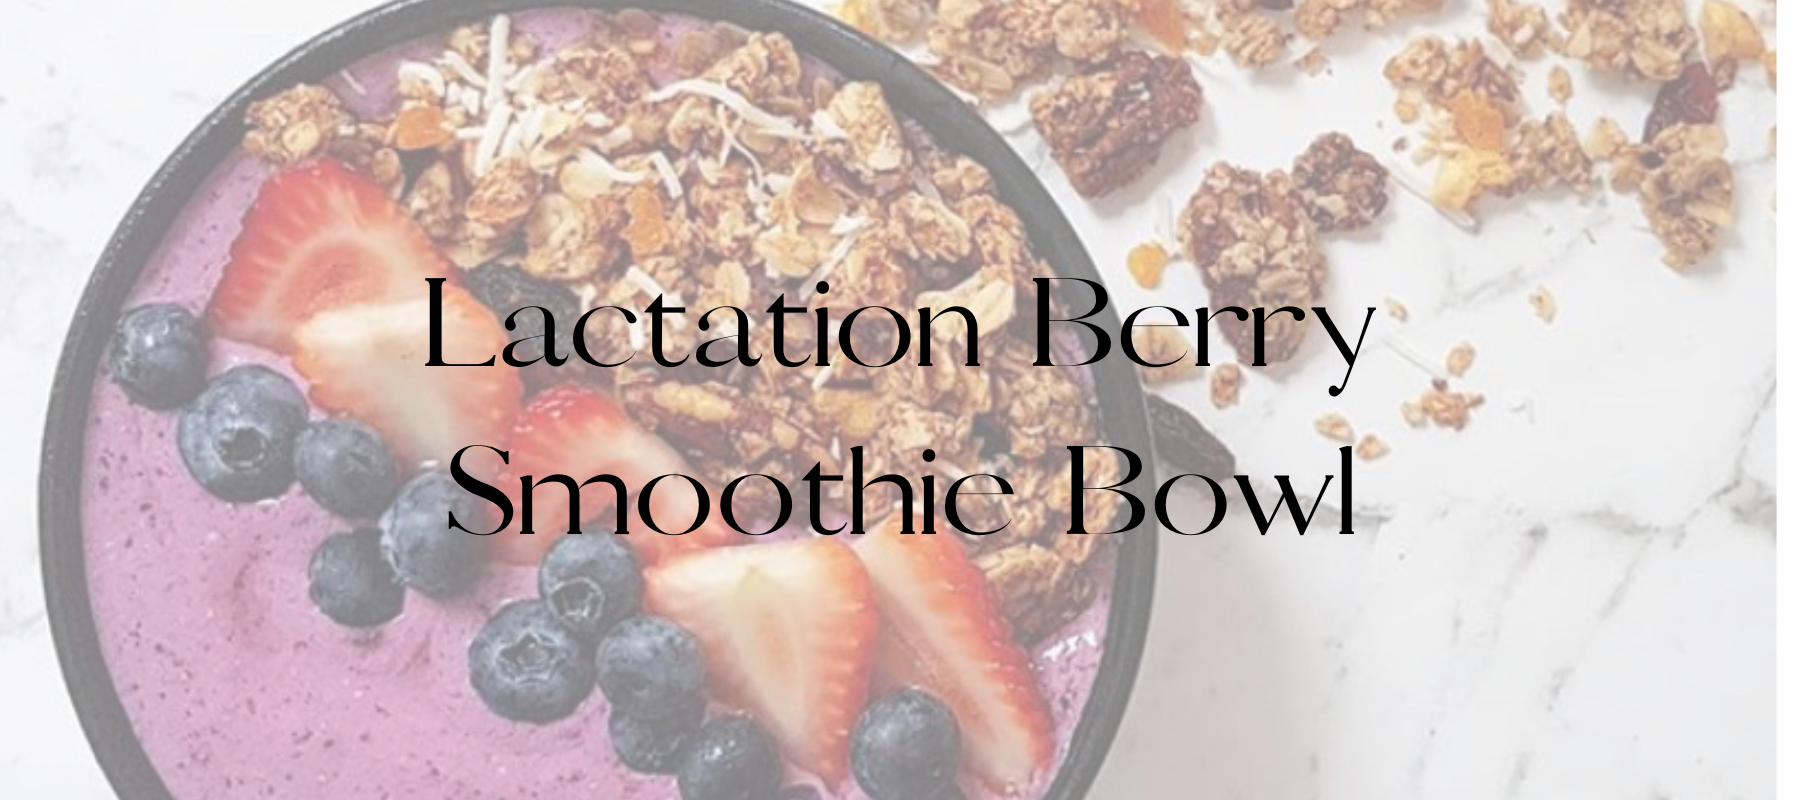 Milky Goodness - Lactation Berry Smoothie Bowl